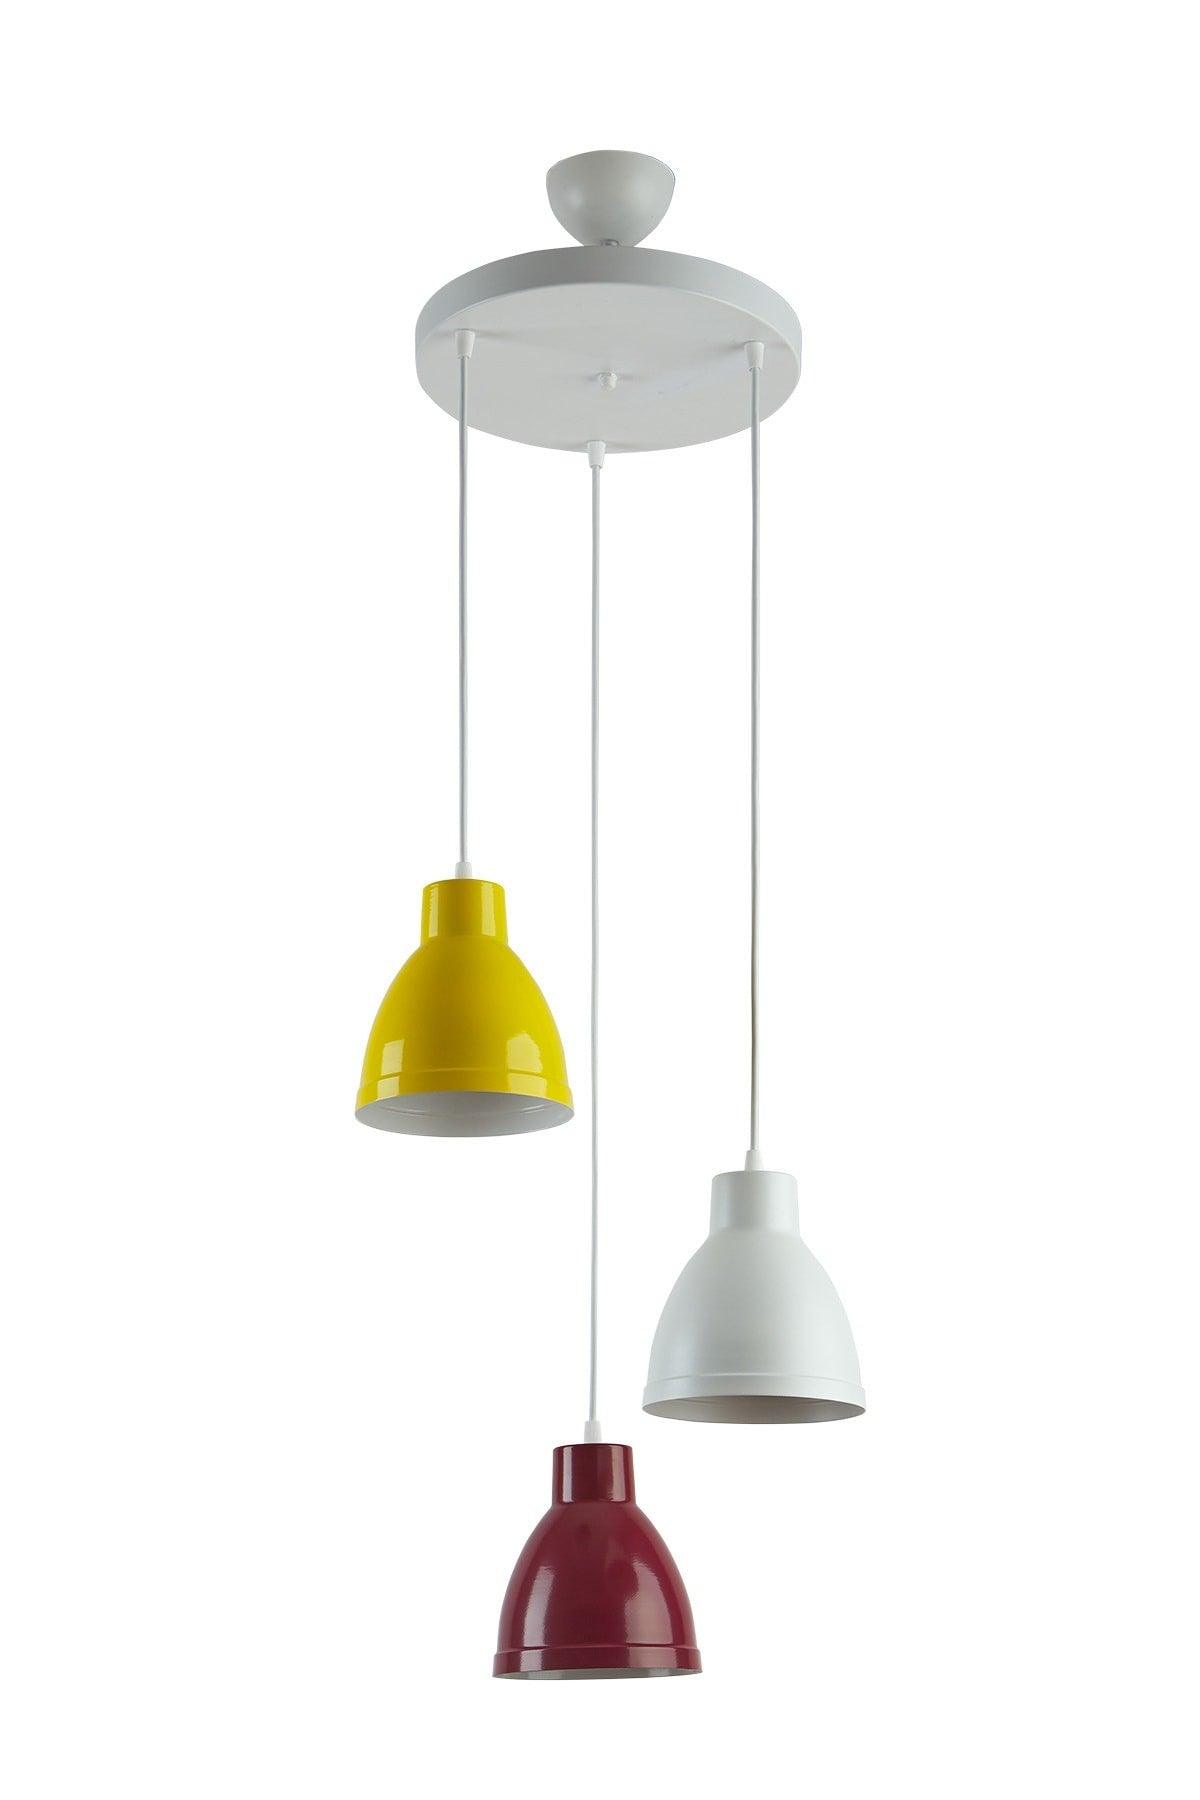 Enzo Special Design Modern Sports Decorative Cafe-kitchen Claret Red - Yellow - White 3 Pcs Suspended Chandelier - Swordslife